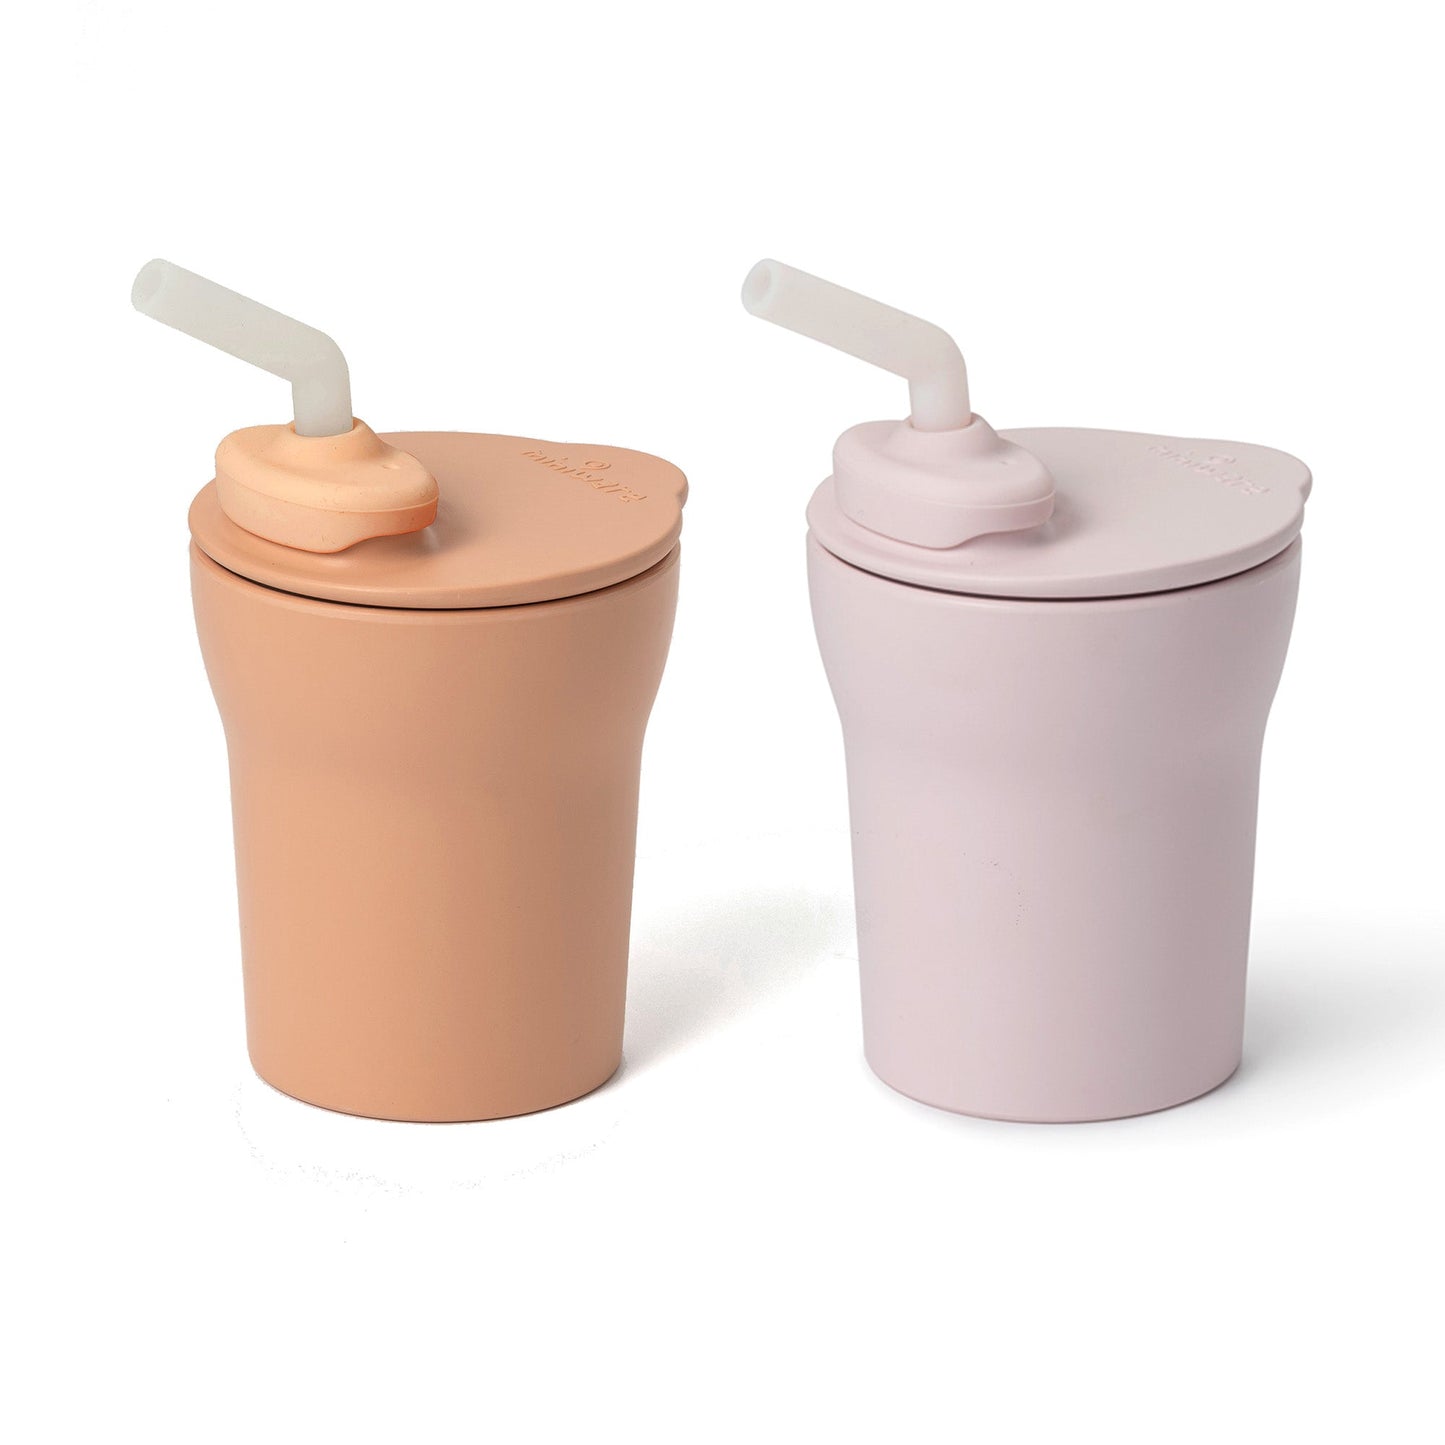 1-2-3 Sip! Becher – Doppelpack (Toffee & Cotton Candy)